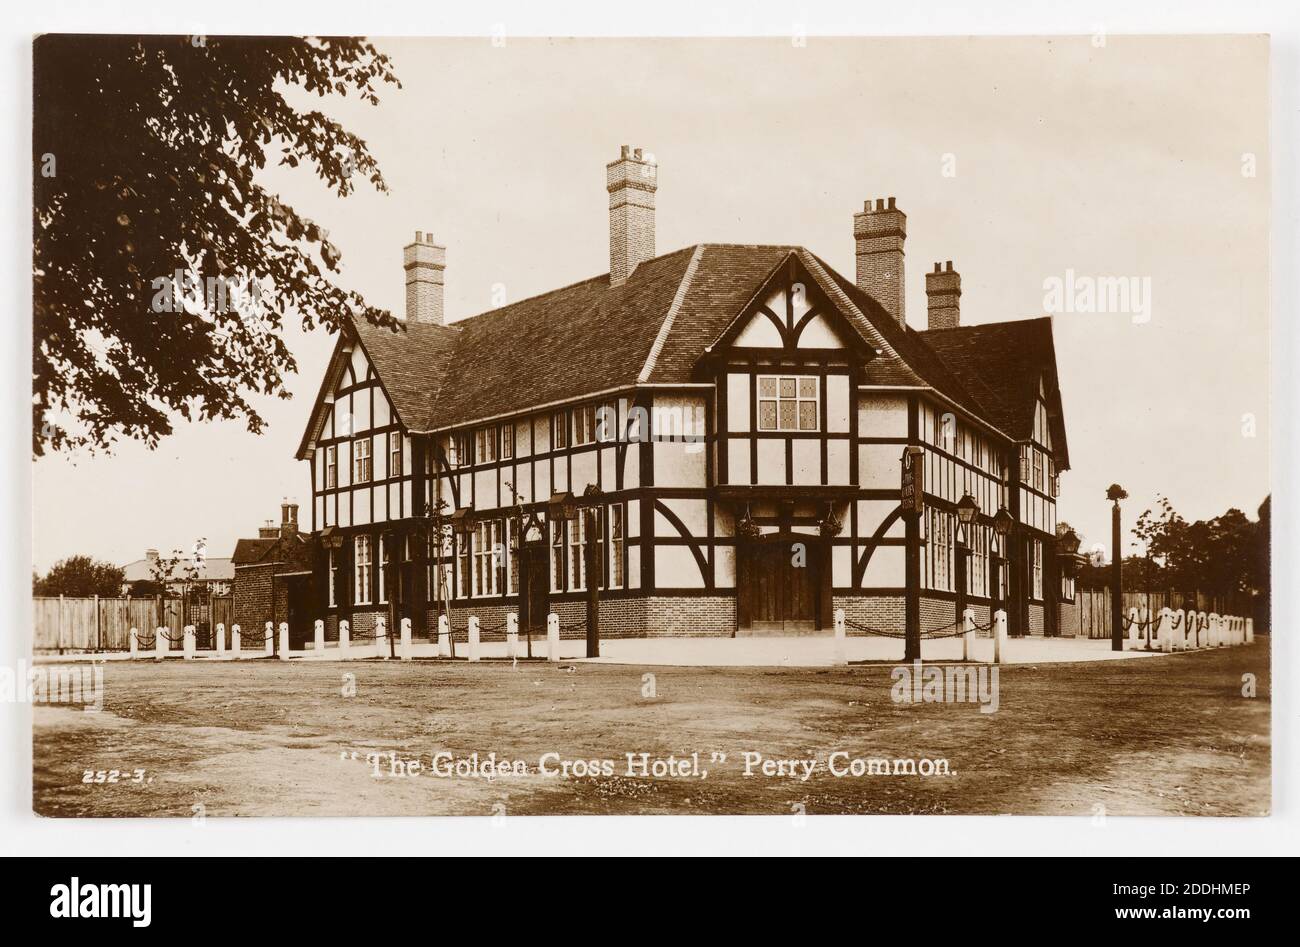 Postcard, Golden Cross Hotel Perry Common, 1930-40 Topographical Views, In the style described as Mock Tudor, Social history, Birmingham history, Public House, Postcard, Social history, Recreation & Leisure Stock Photo